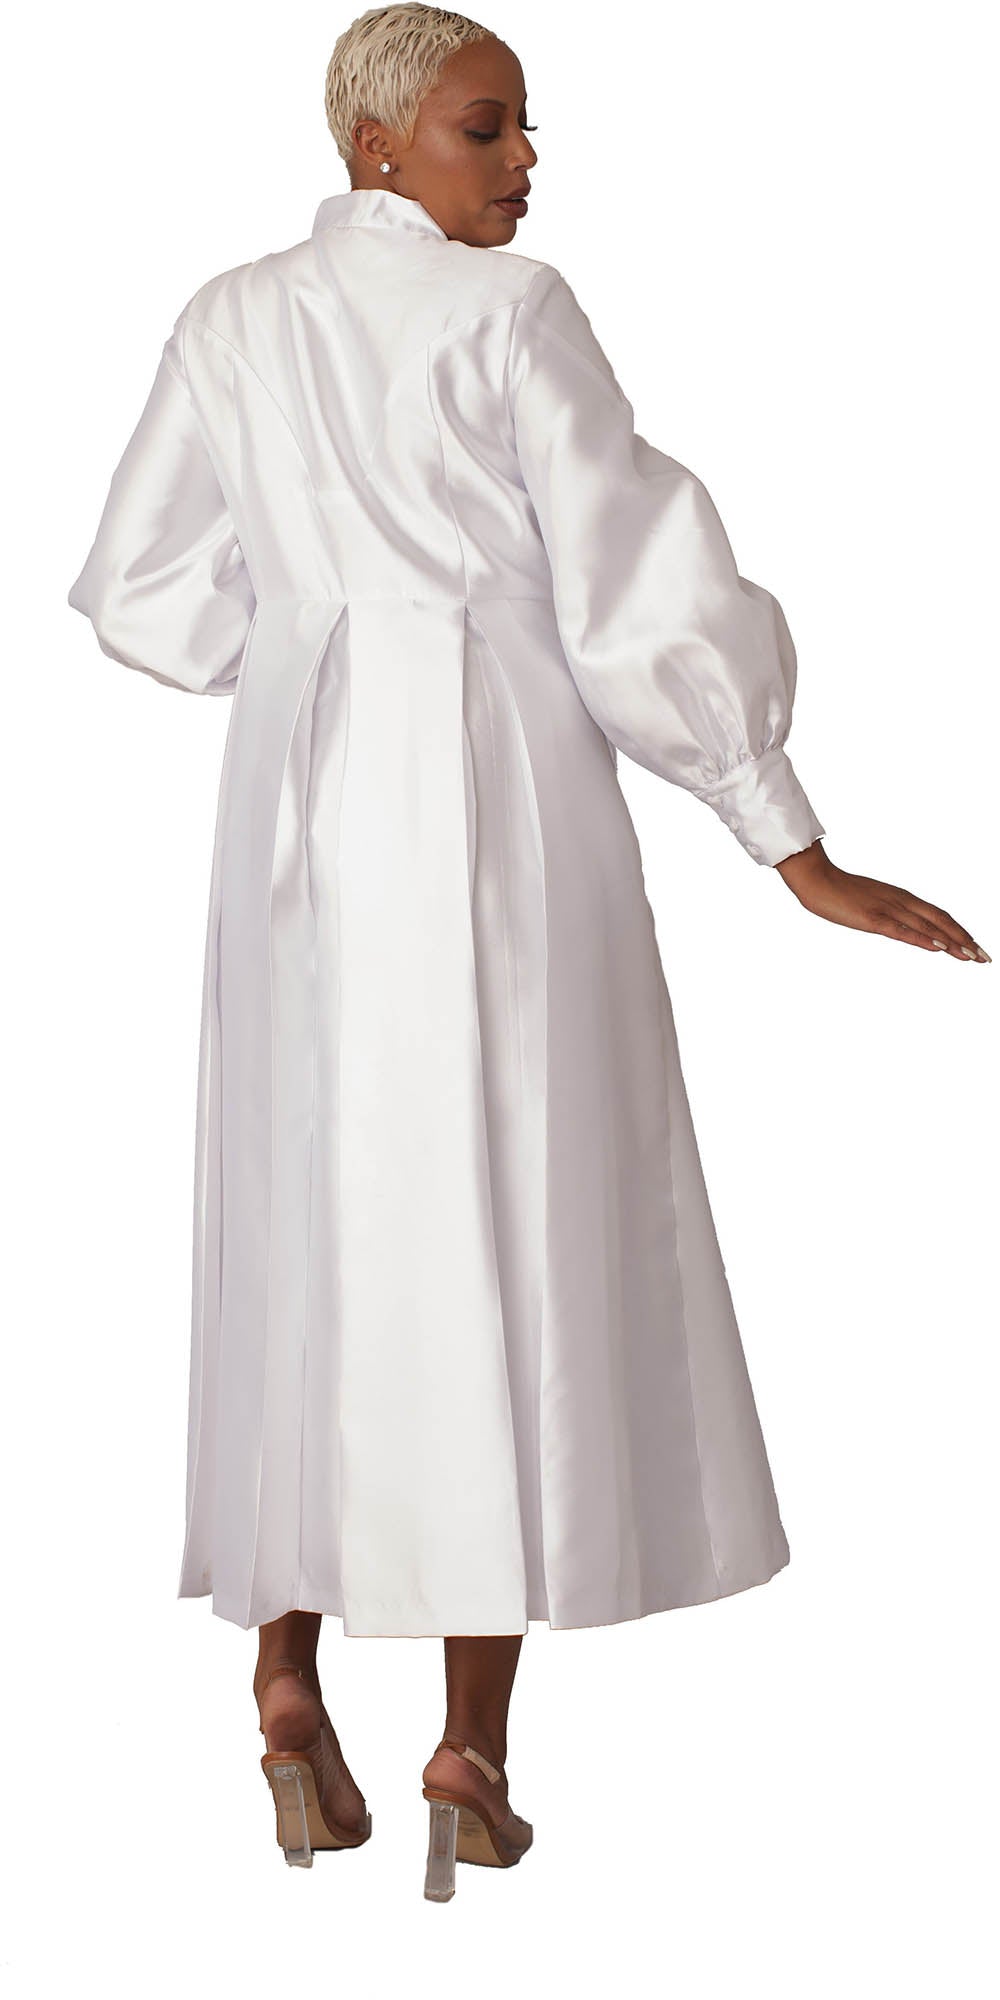 Tally Taylor - 4802 - White White - Women's Clergy Dress With Bishop Sleeves